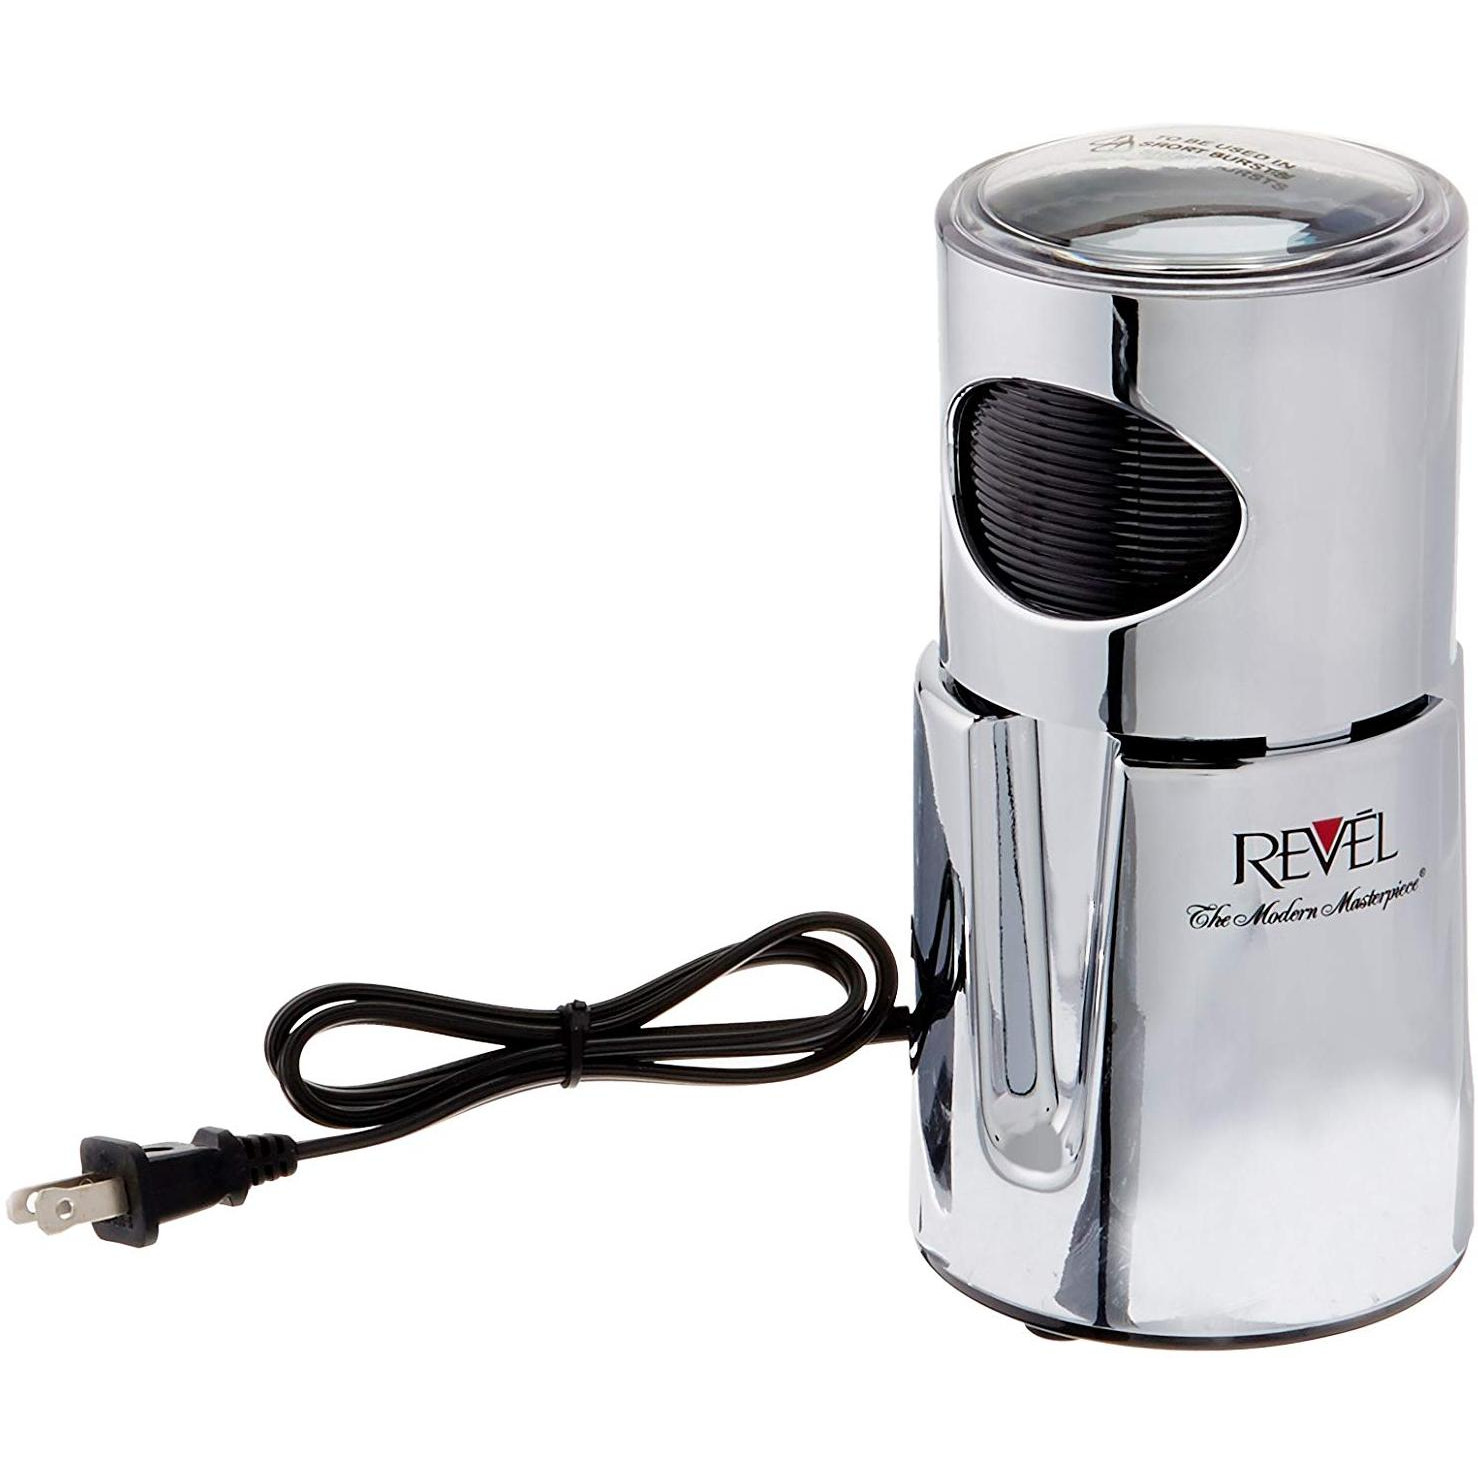 Revel CCM101CH 110-volt Wet and Dry Coffee/Spice Grinder, Chrome